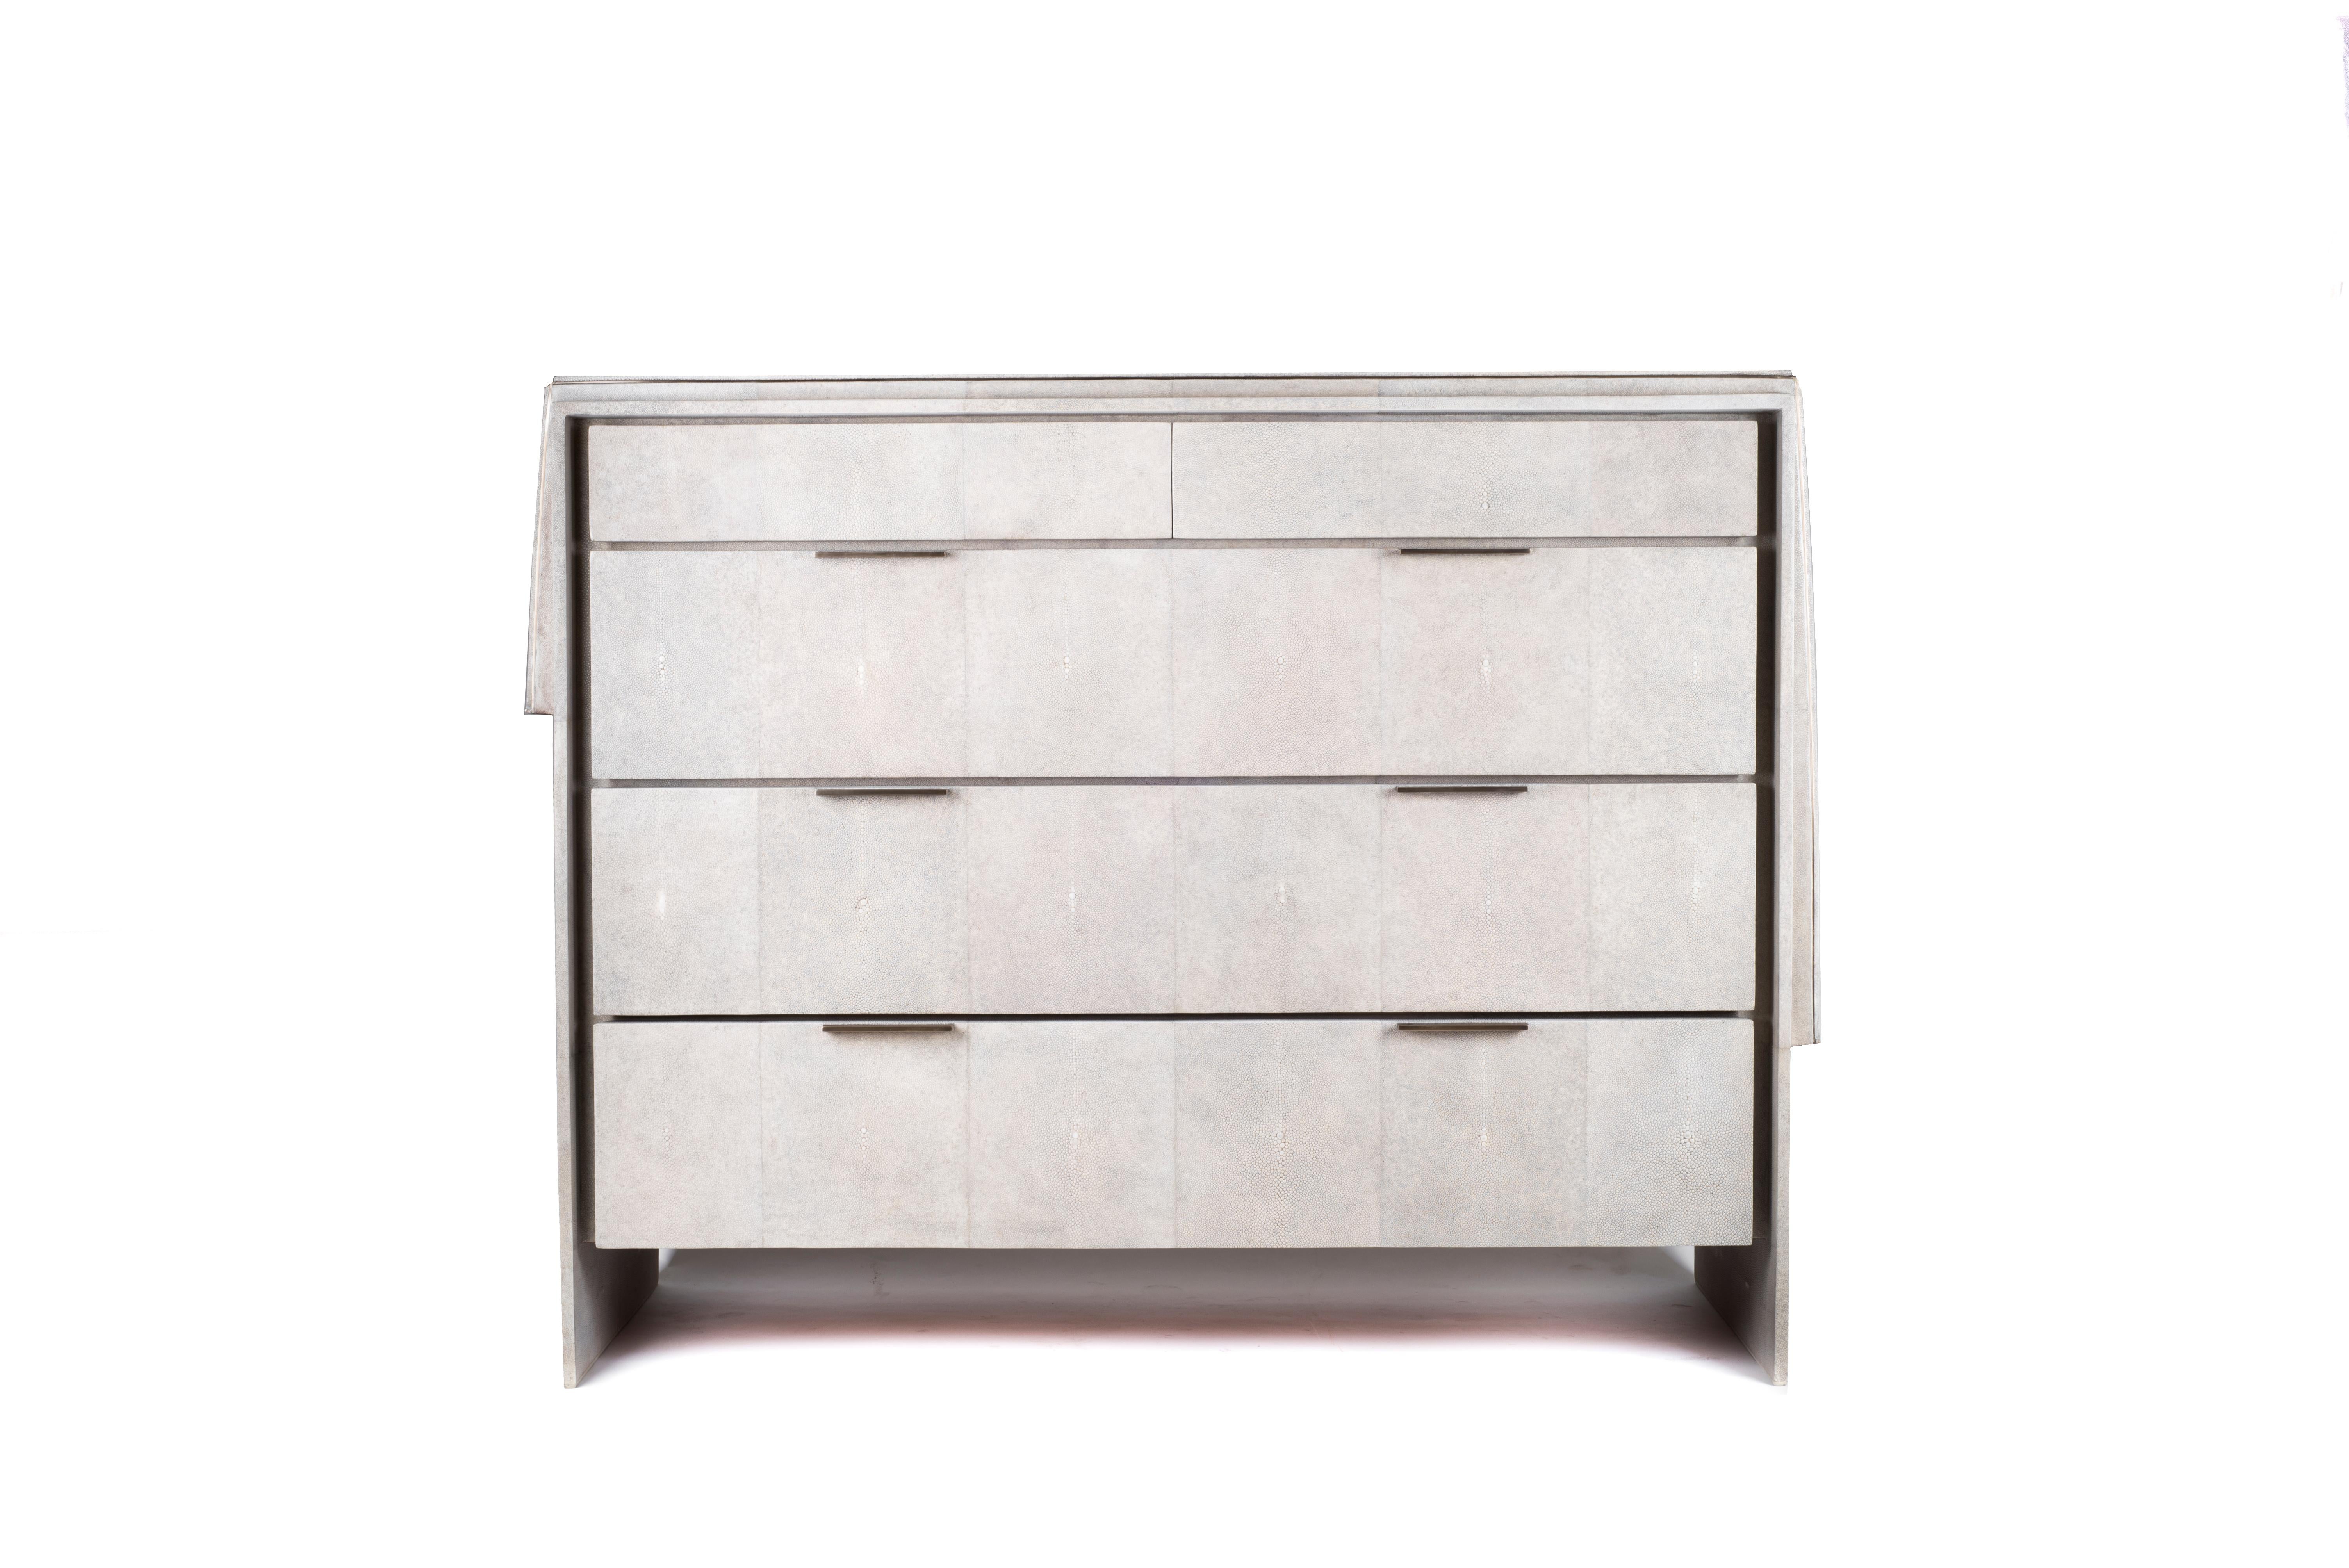 The Waldorf chest of drawers in cream shagreen is a beautifully detailed piece with its asymmetric shagreen overlay on top and discreet metal border indentation. The thin bronze-patina brass handles allow for practically while maintaining the